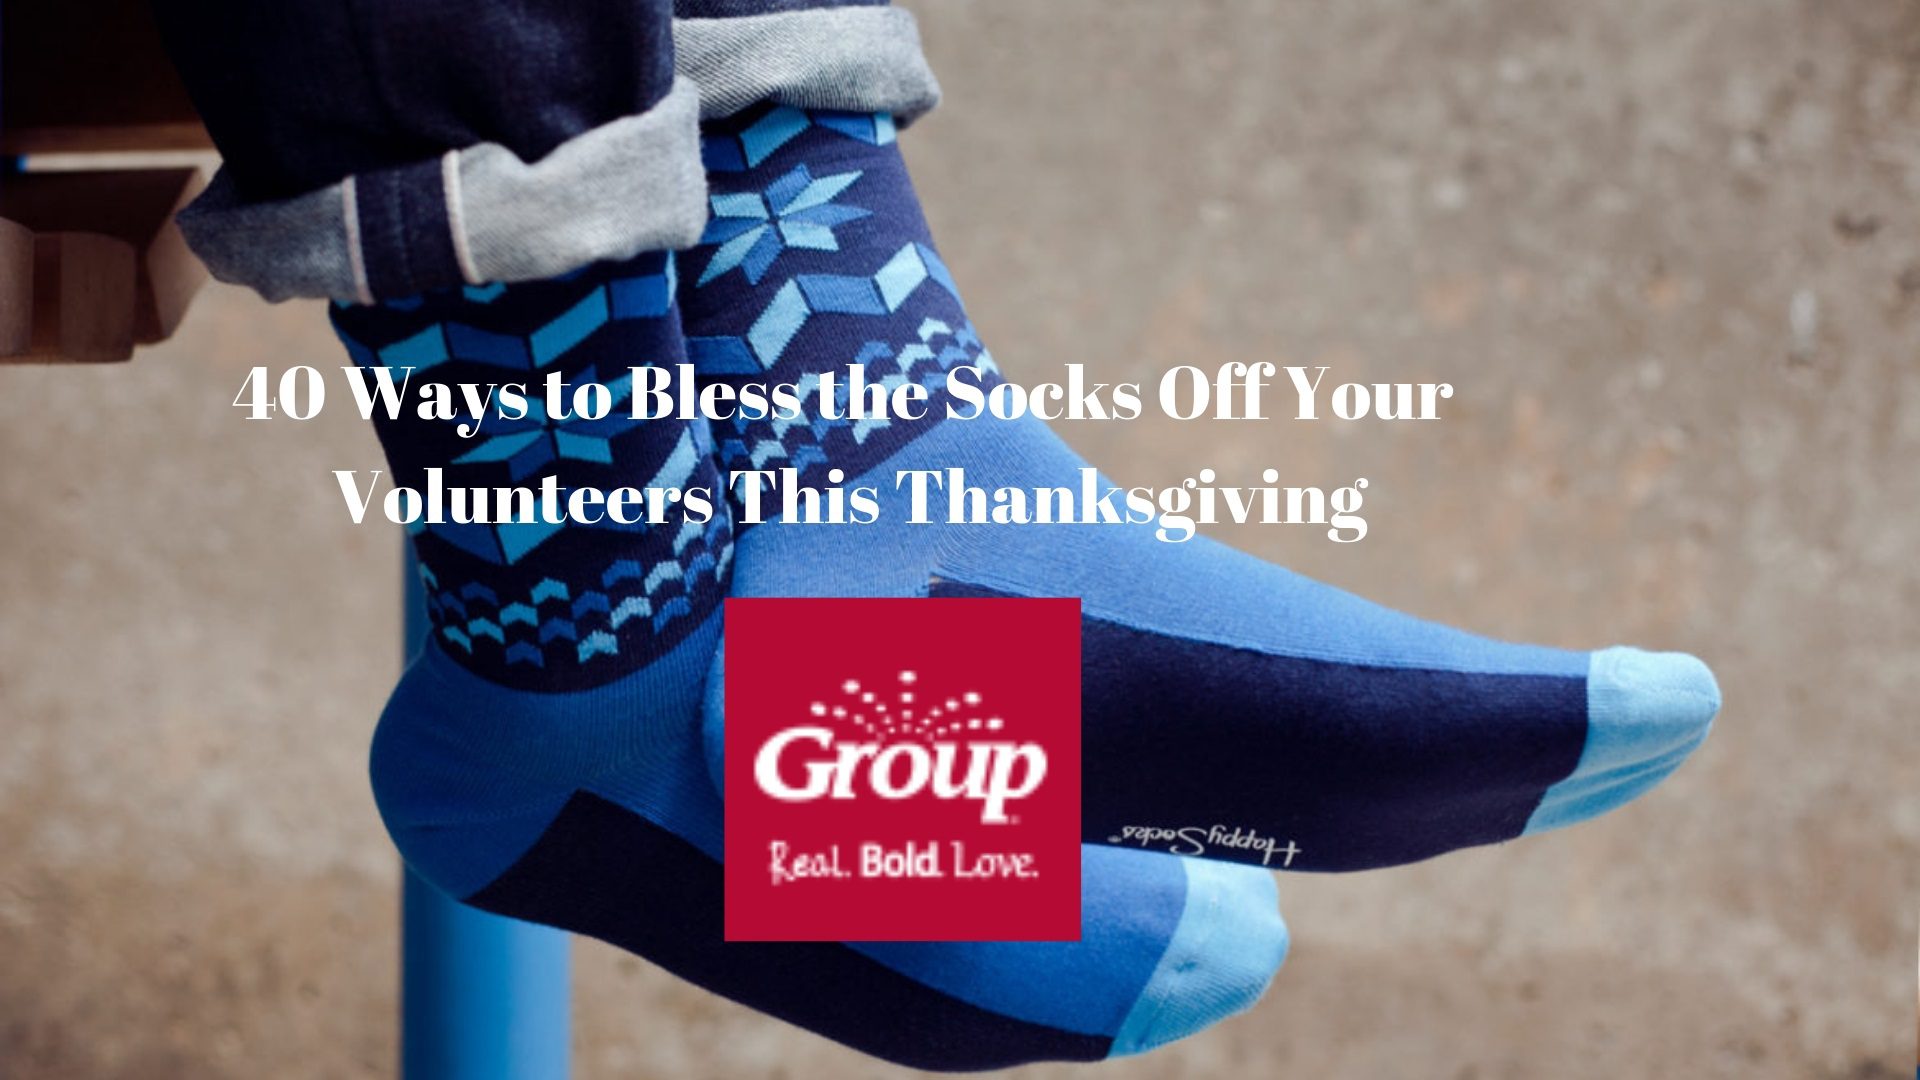 40 Ways to Bless the Socks Off Your Volunteers This Thanksgiving